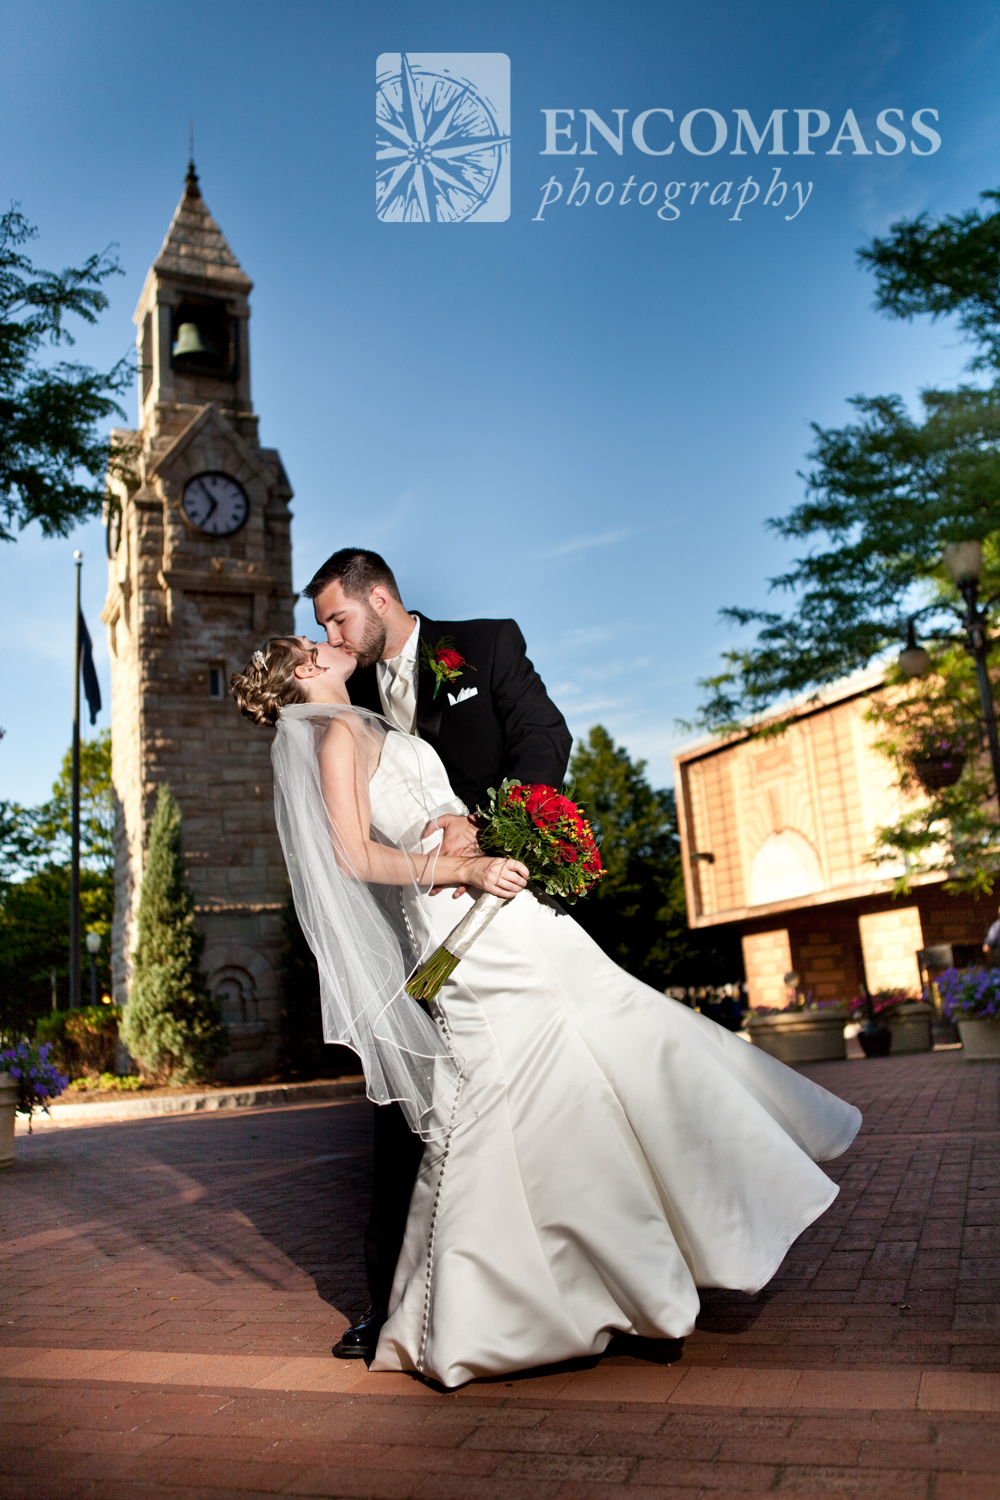 Lynsey and Cliff's Wedding Corning Country Club, Corning NY ...